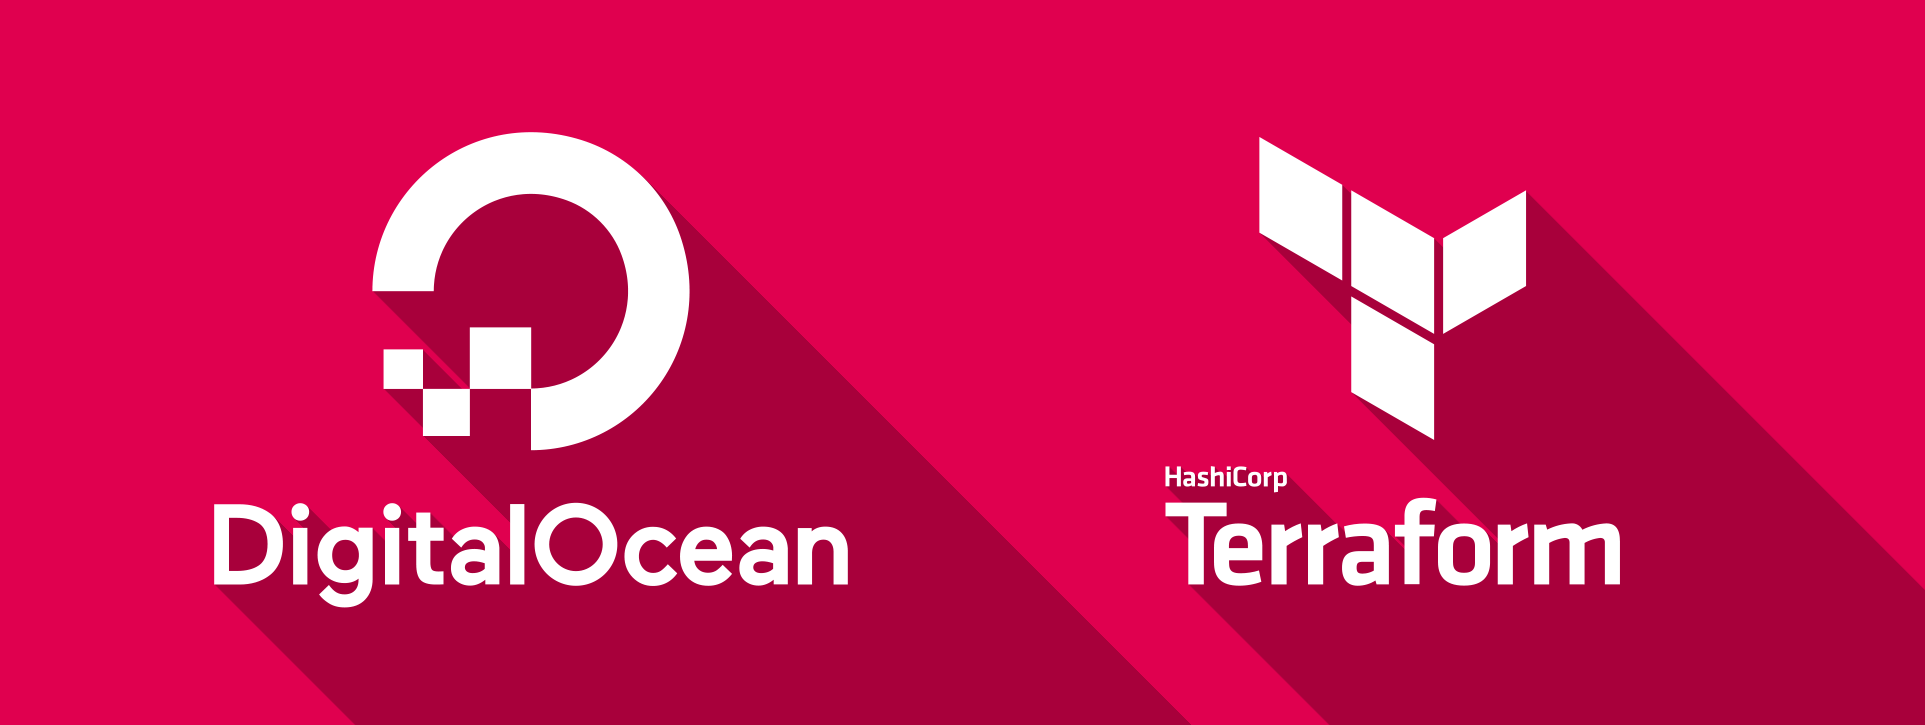 How to Deploy Applications to DigitalOcean with Terraform